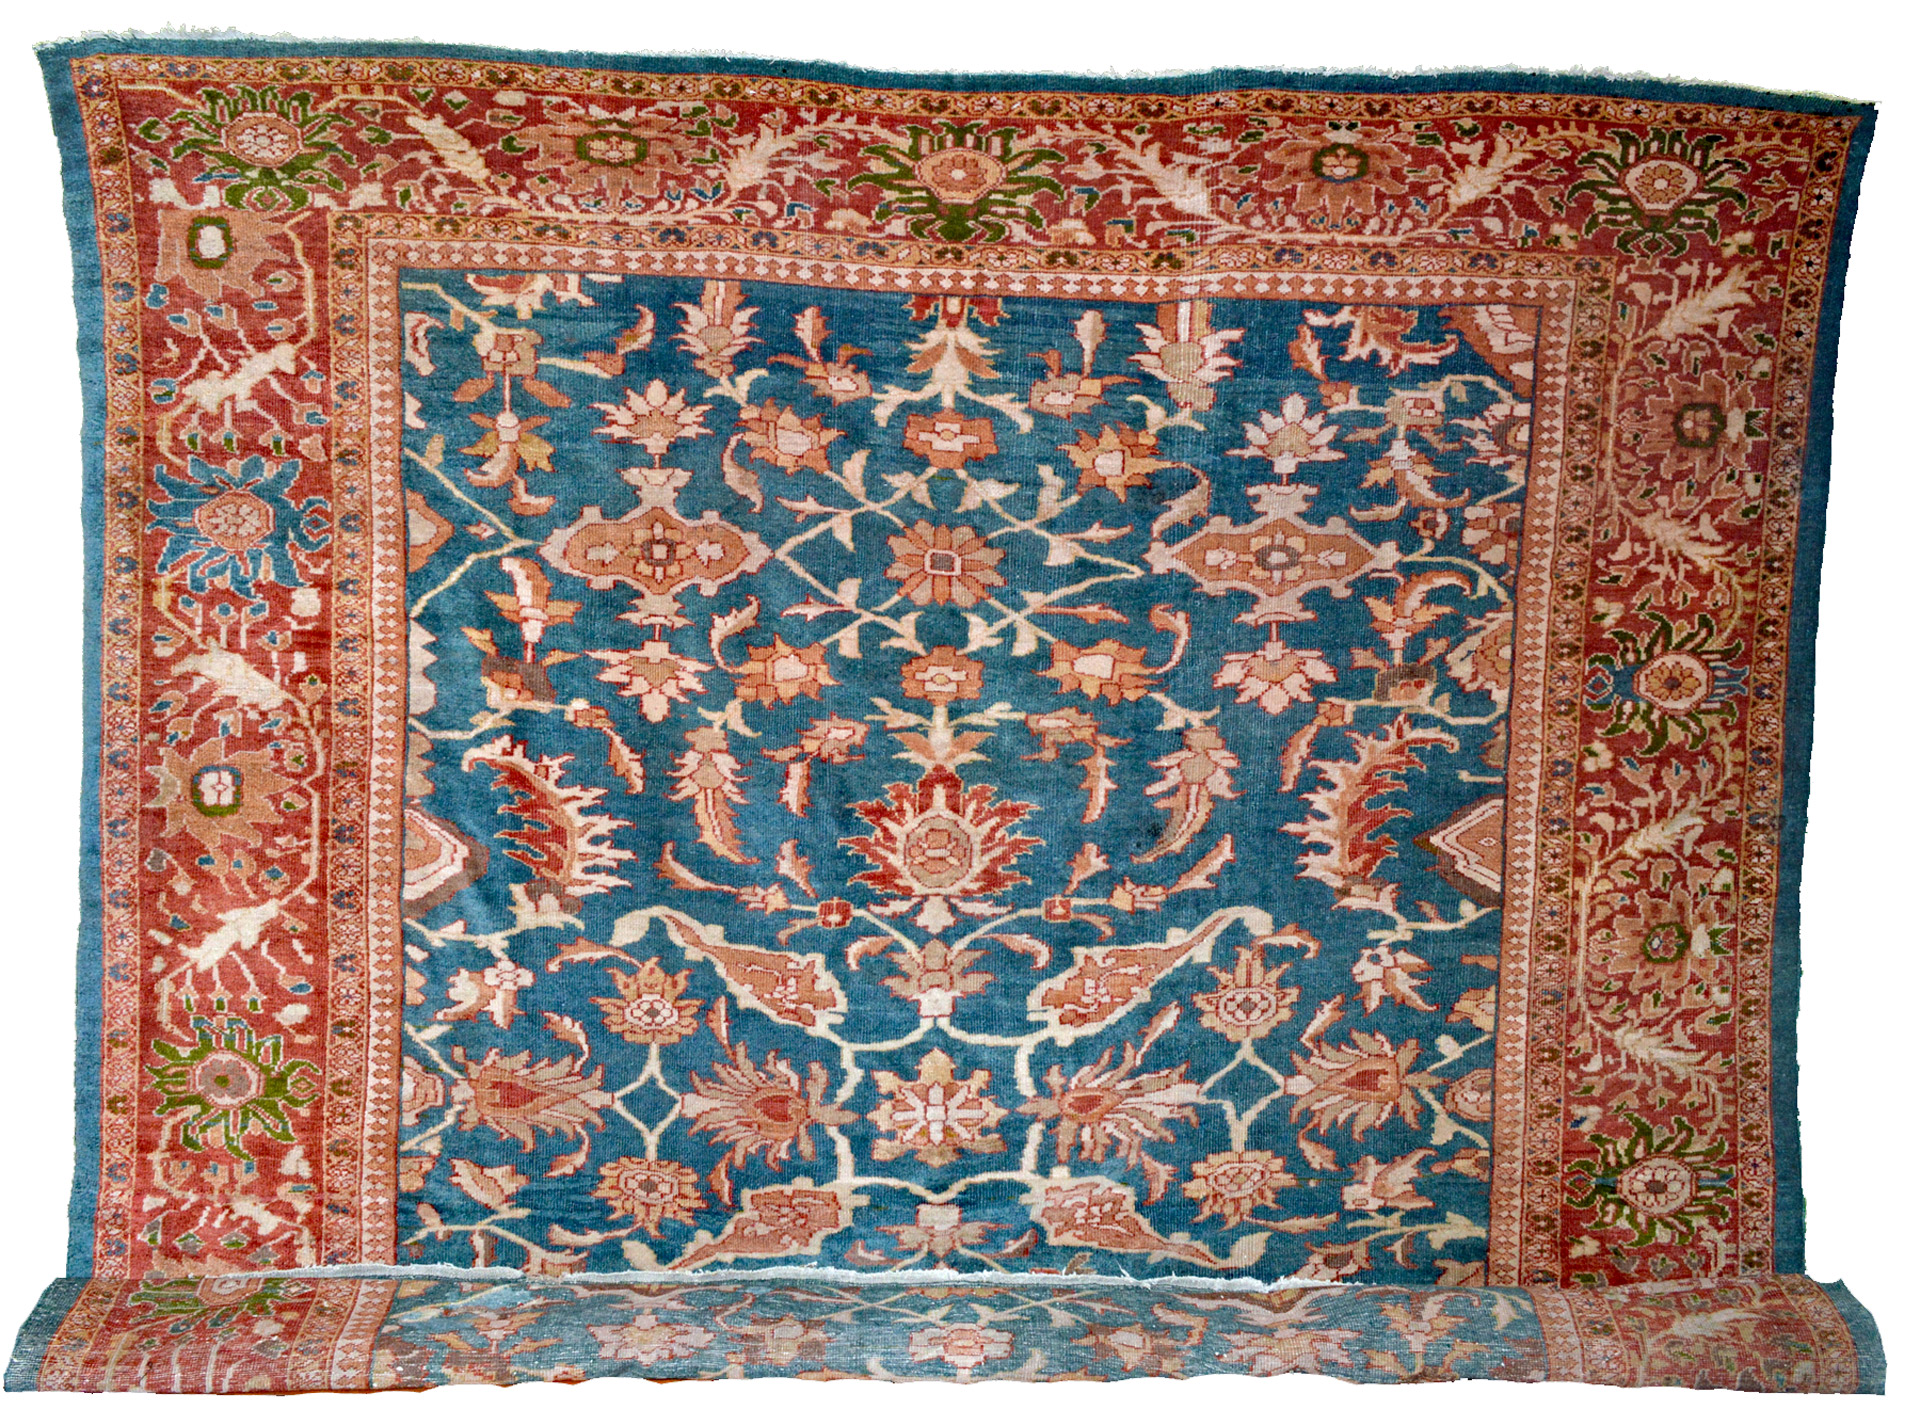 Antique Persian Sultanabad carpet with steel blue field and all-over design